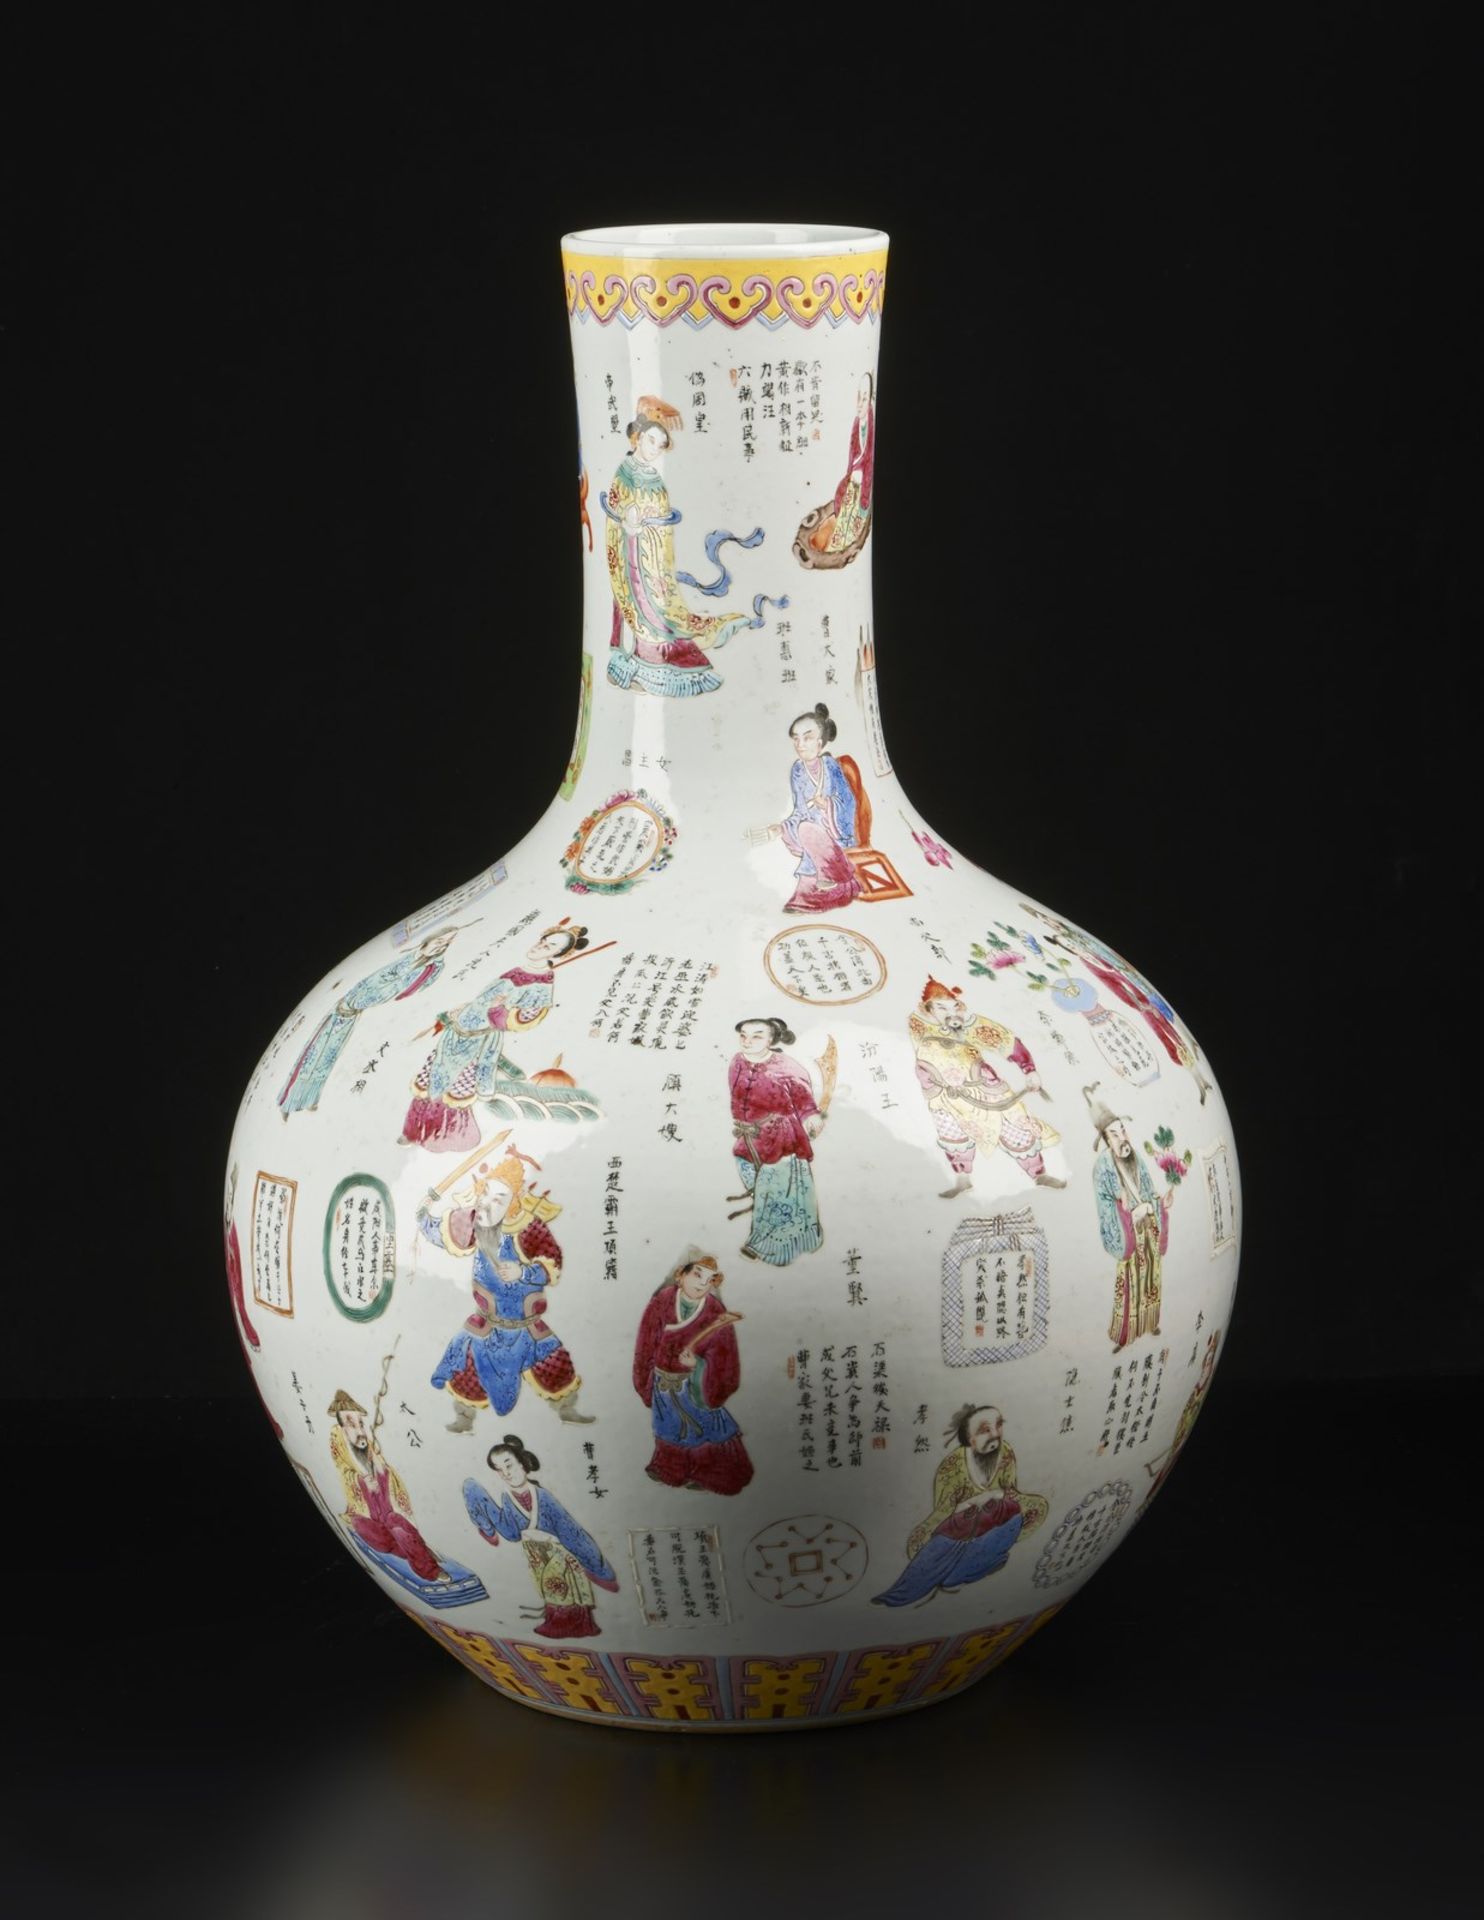 Arte Cinese A large tianchuping porcelain vase painted with characters and long inscriptionsChina, - Image 3 of 5